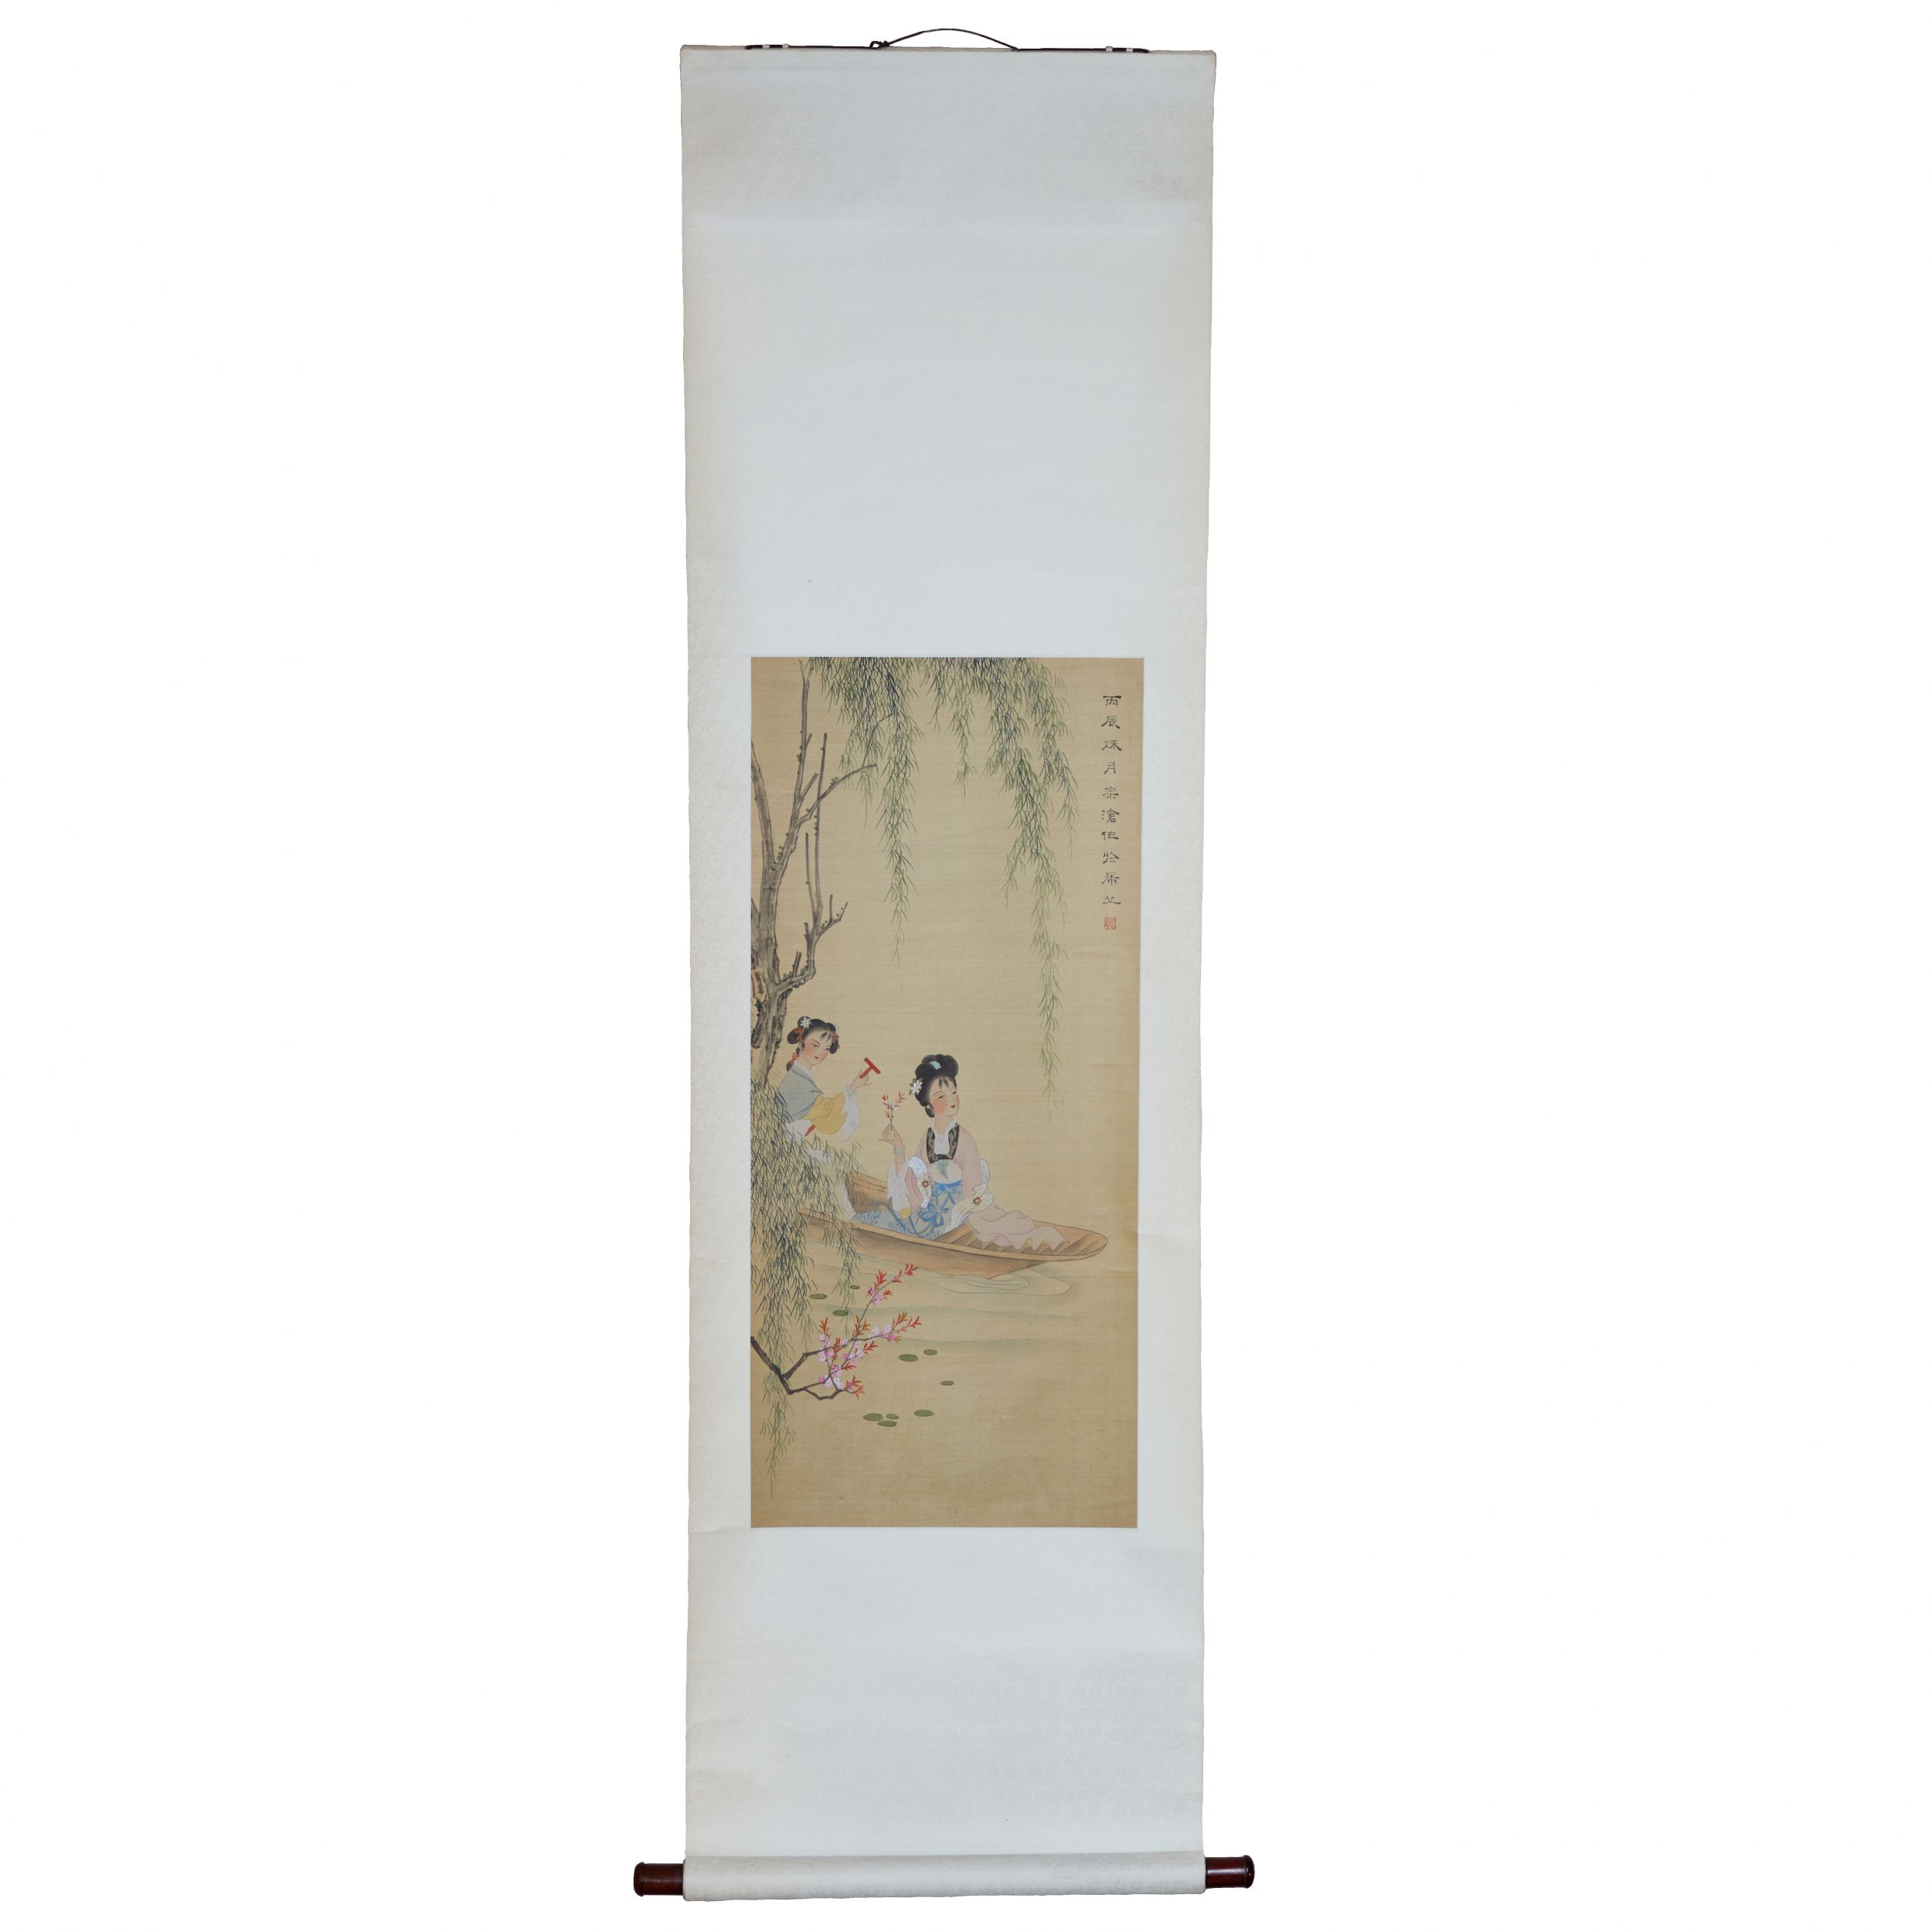 Chinese scroll, water-based painting on silk. Seal: Wen Jin. The turn of the 19th-20th centuries. - Image 2 of 4